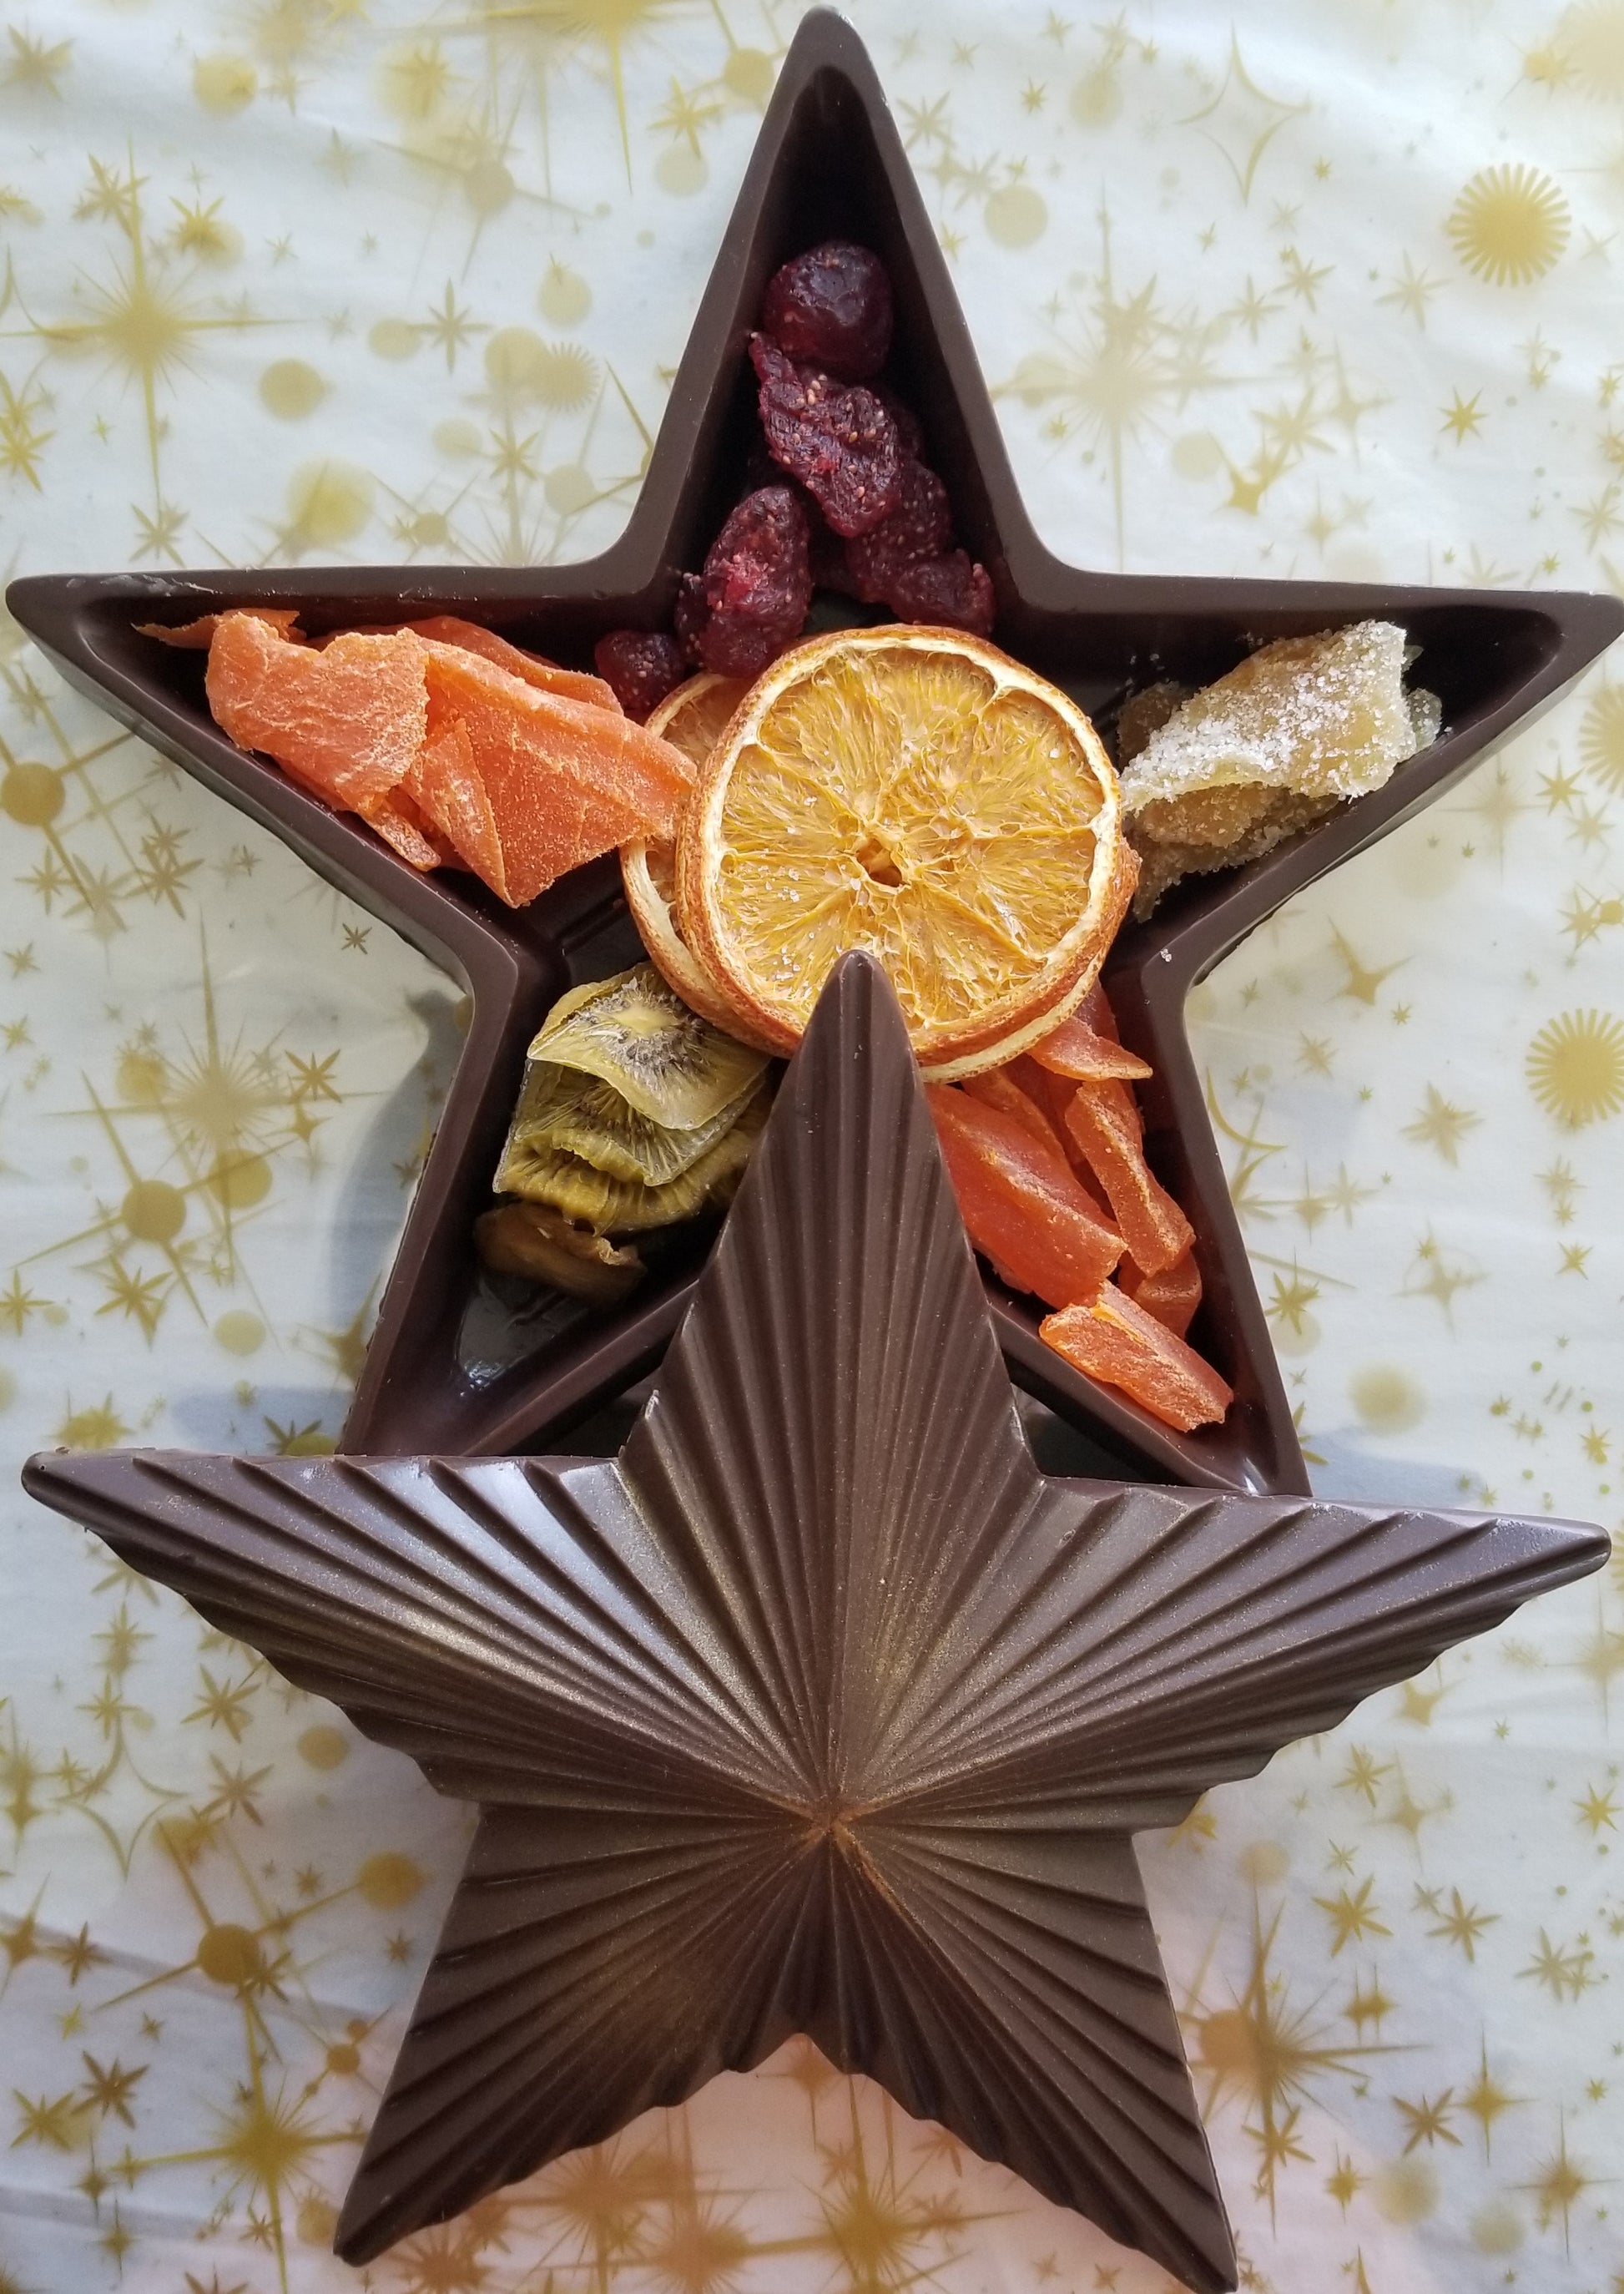 Christmas Star Shaped Chocolate Gift Box with Candied & Dried Fruits